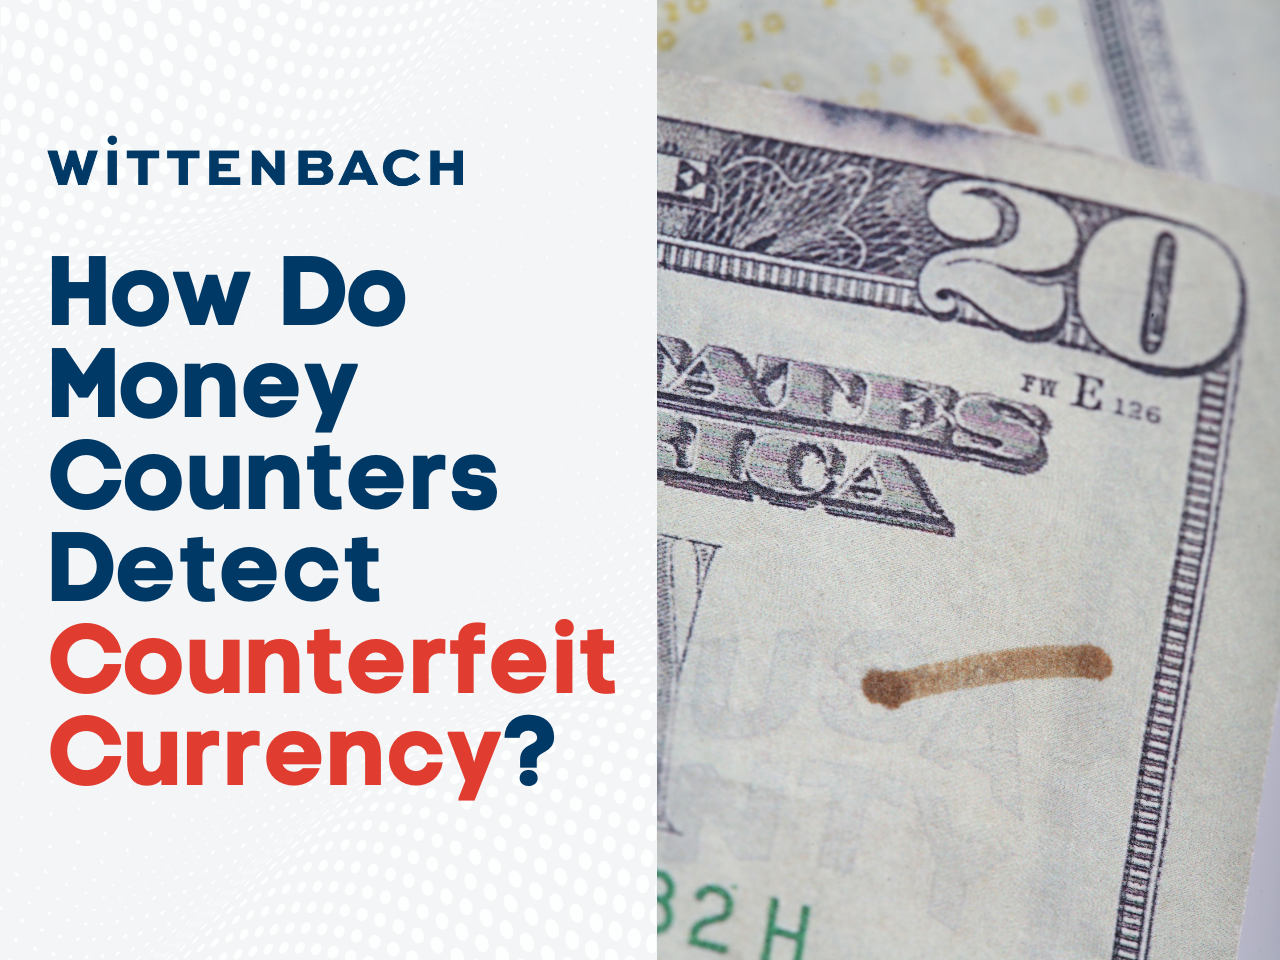 How Do Money Counters Detect Counterfeit Currency?